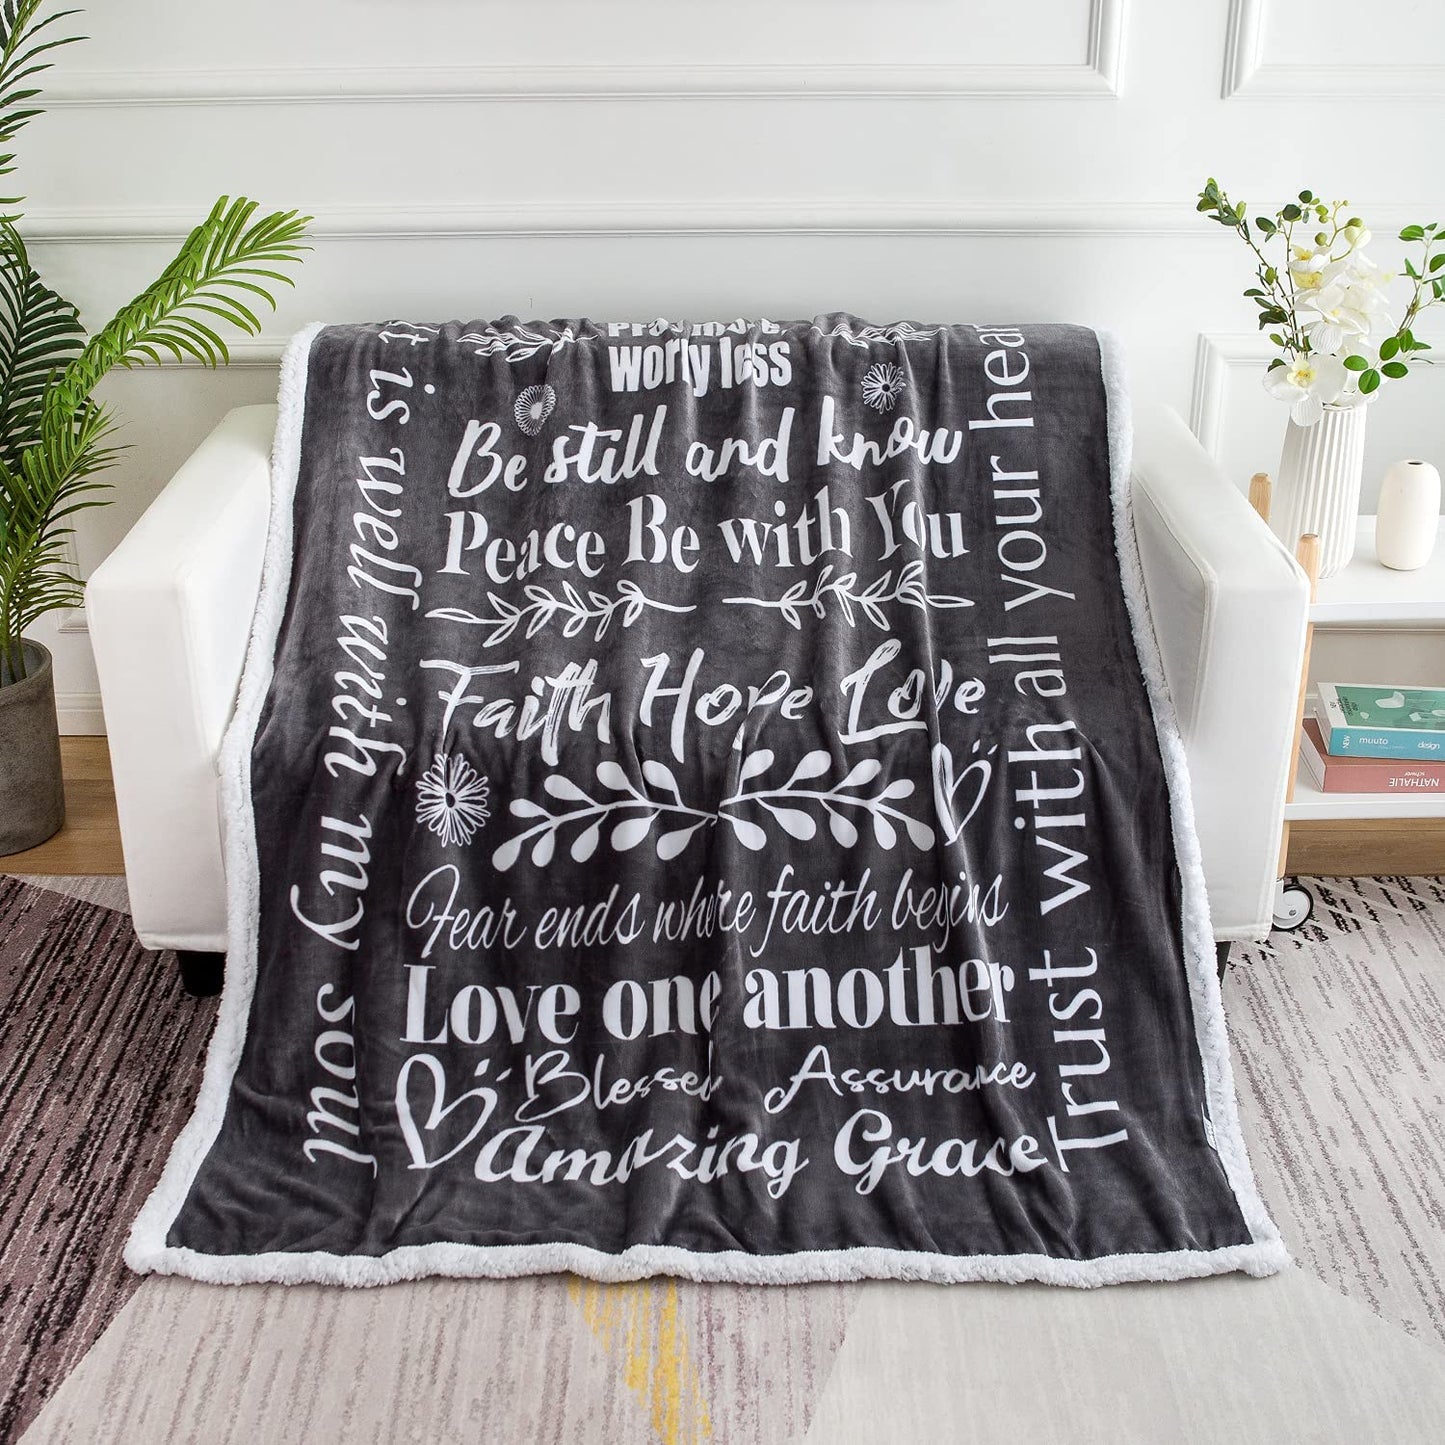 Wrap Yourself up in This and Consider a Big Hug with Our Blanket!